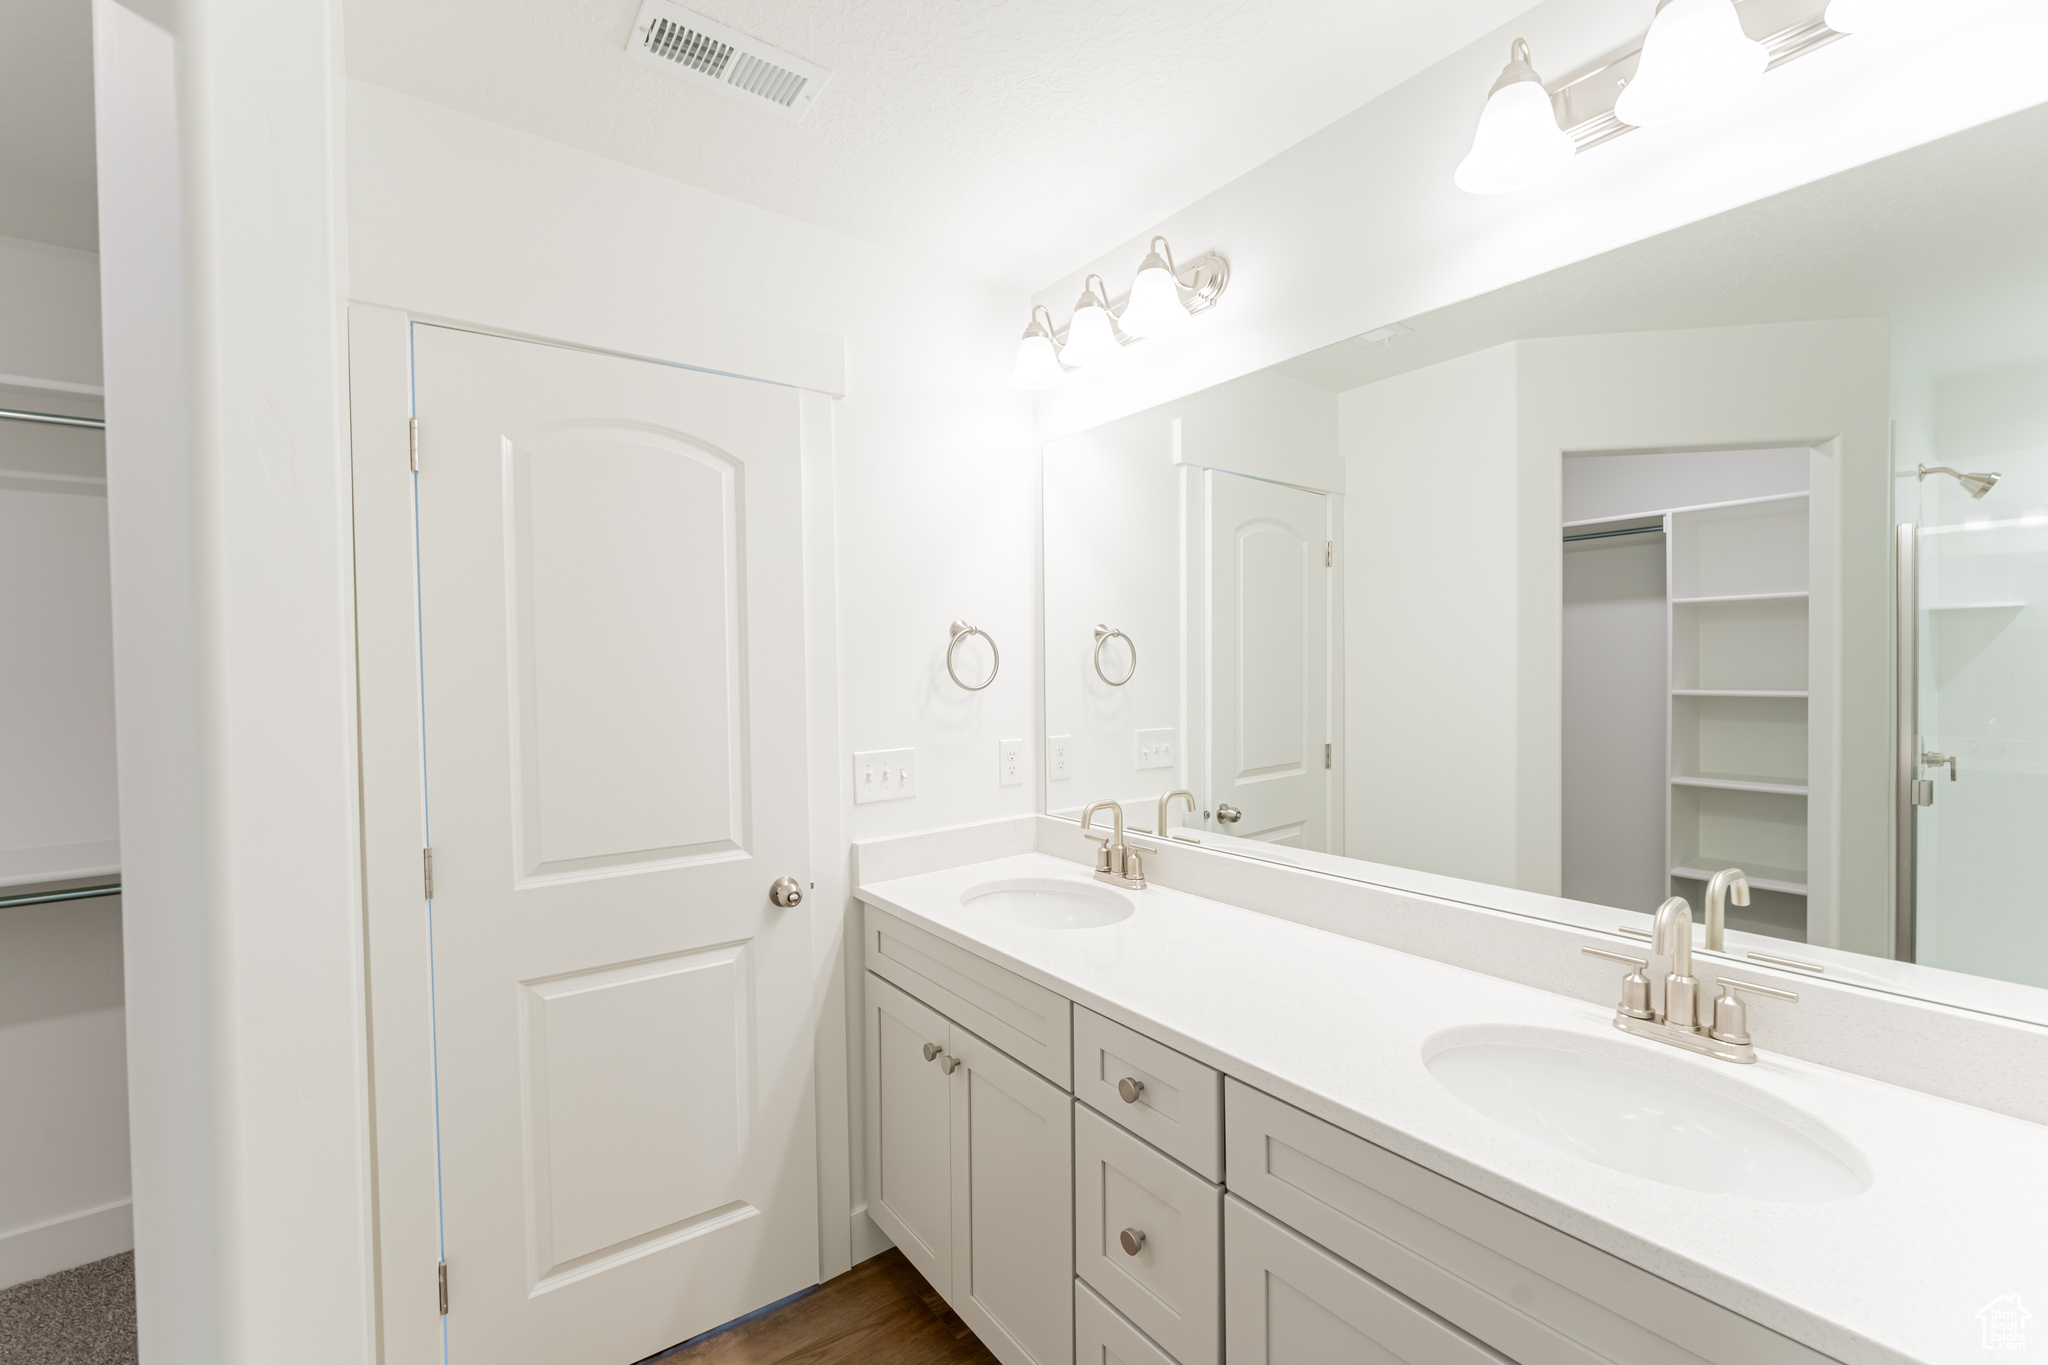 Bathroom featuring double sink and oversized vanity